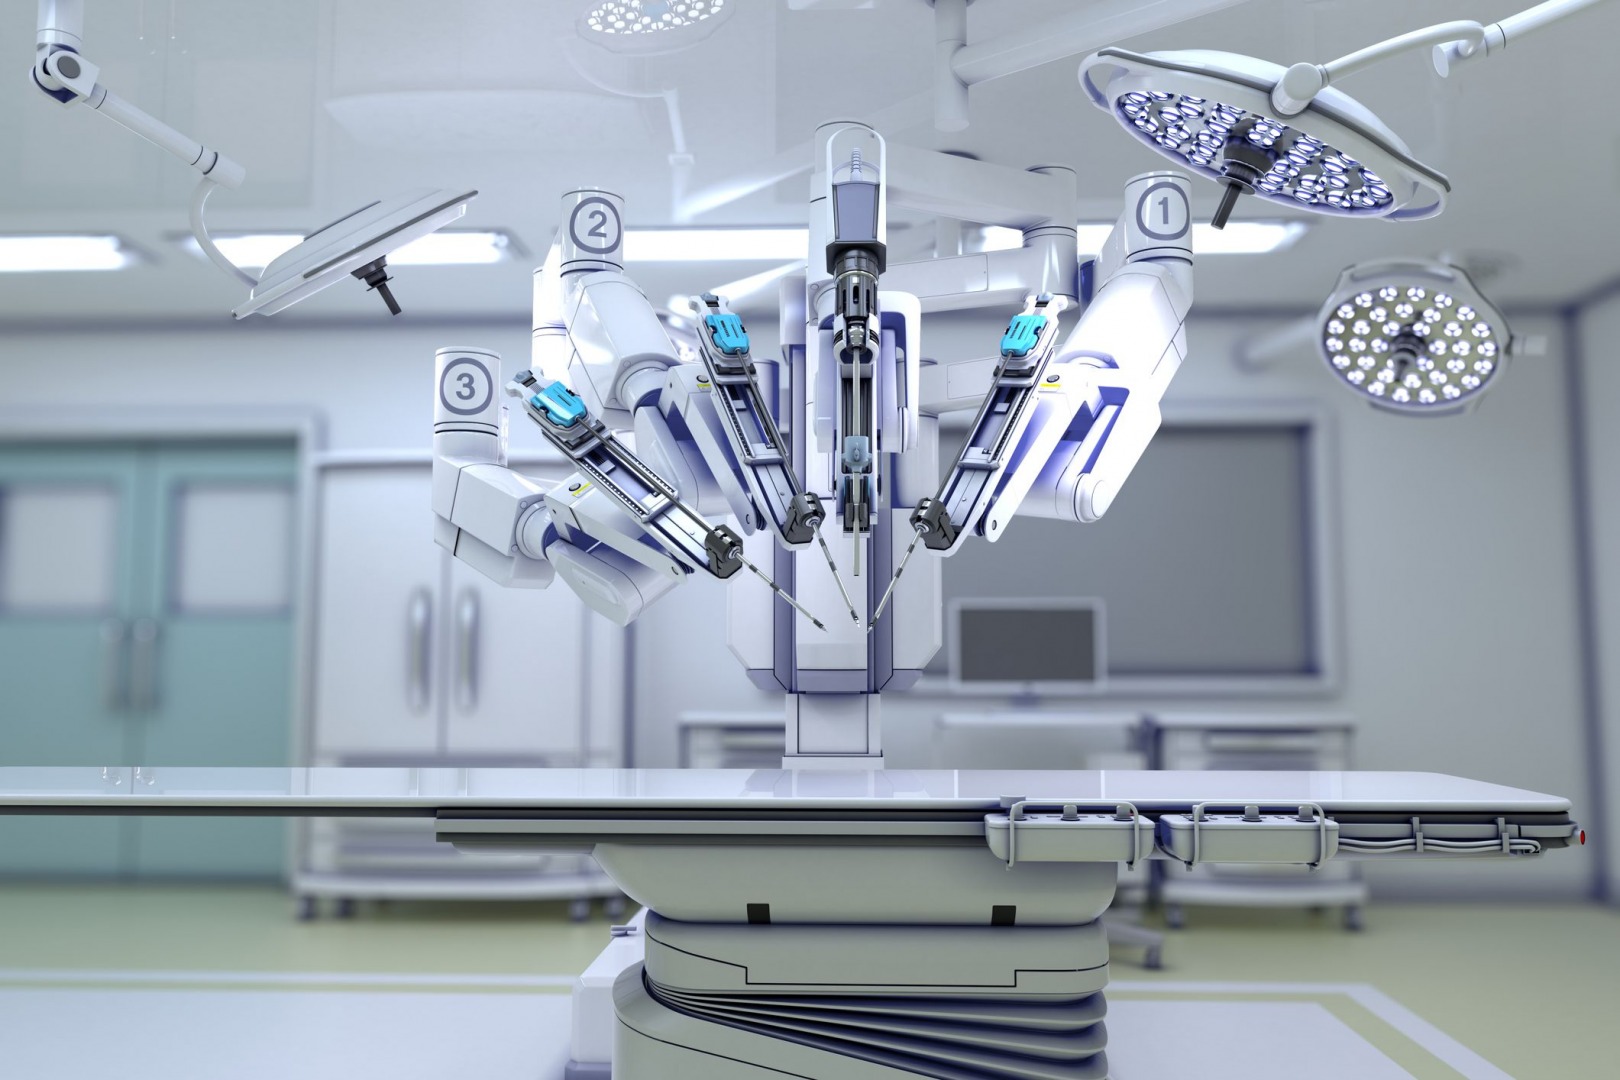 A Robot Performs Laparoscopic Surgery Without Human Help